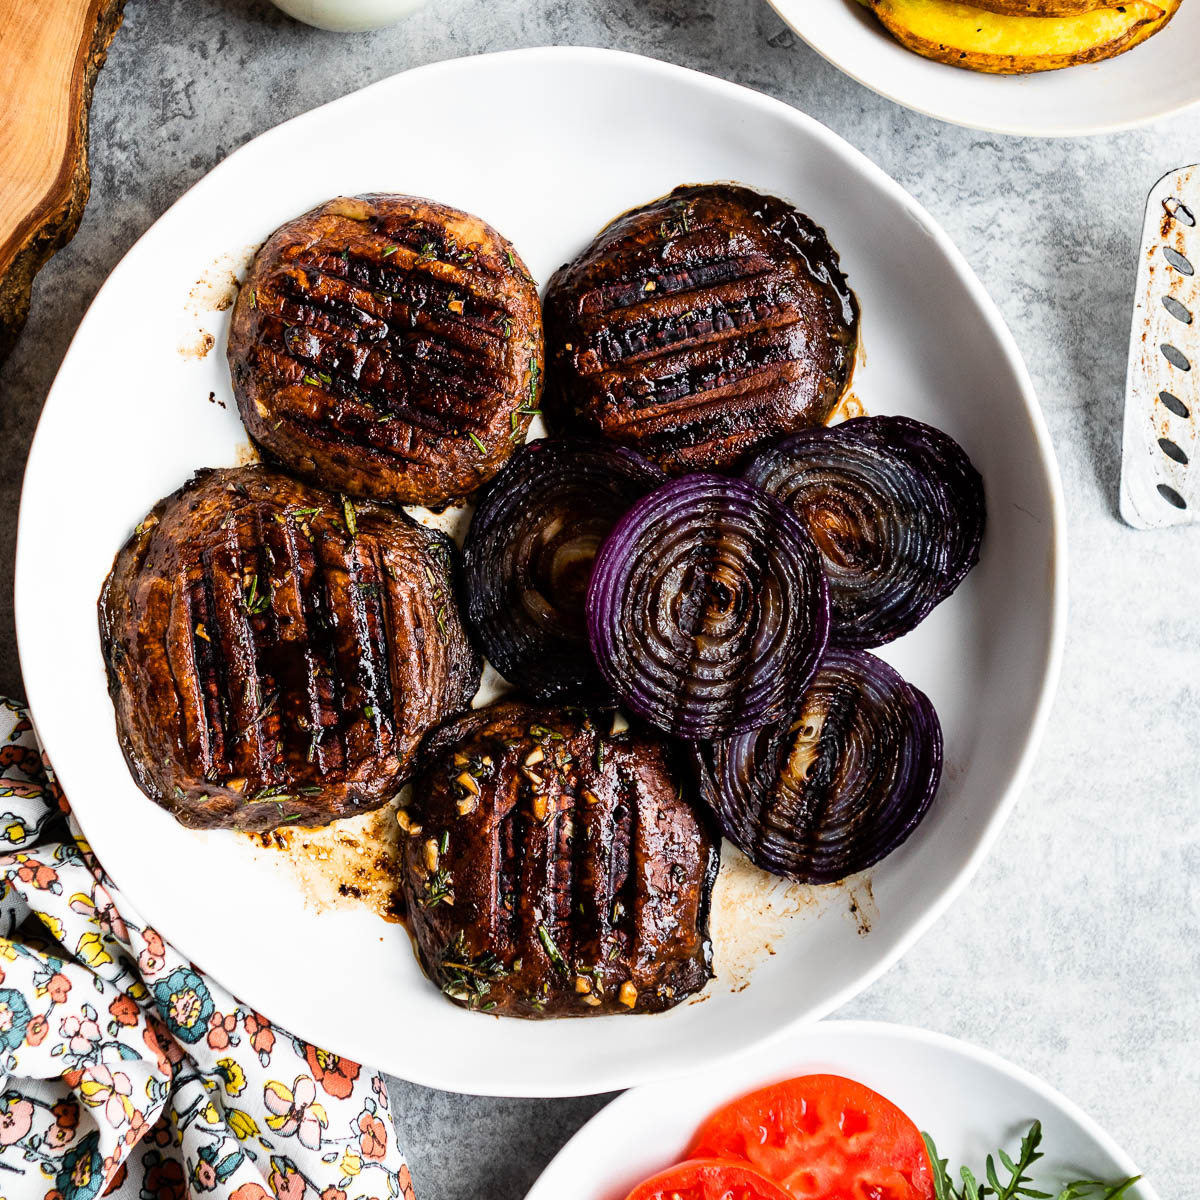 Grilled Portobello mushrooms and onions on a white plate